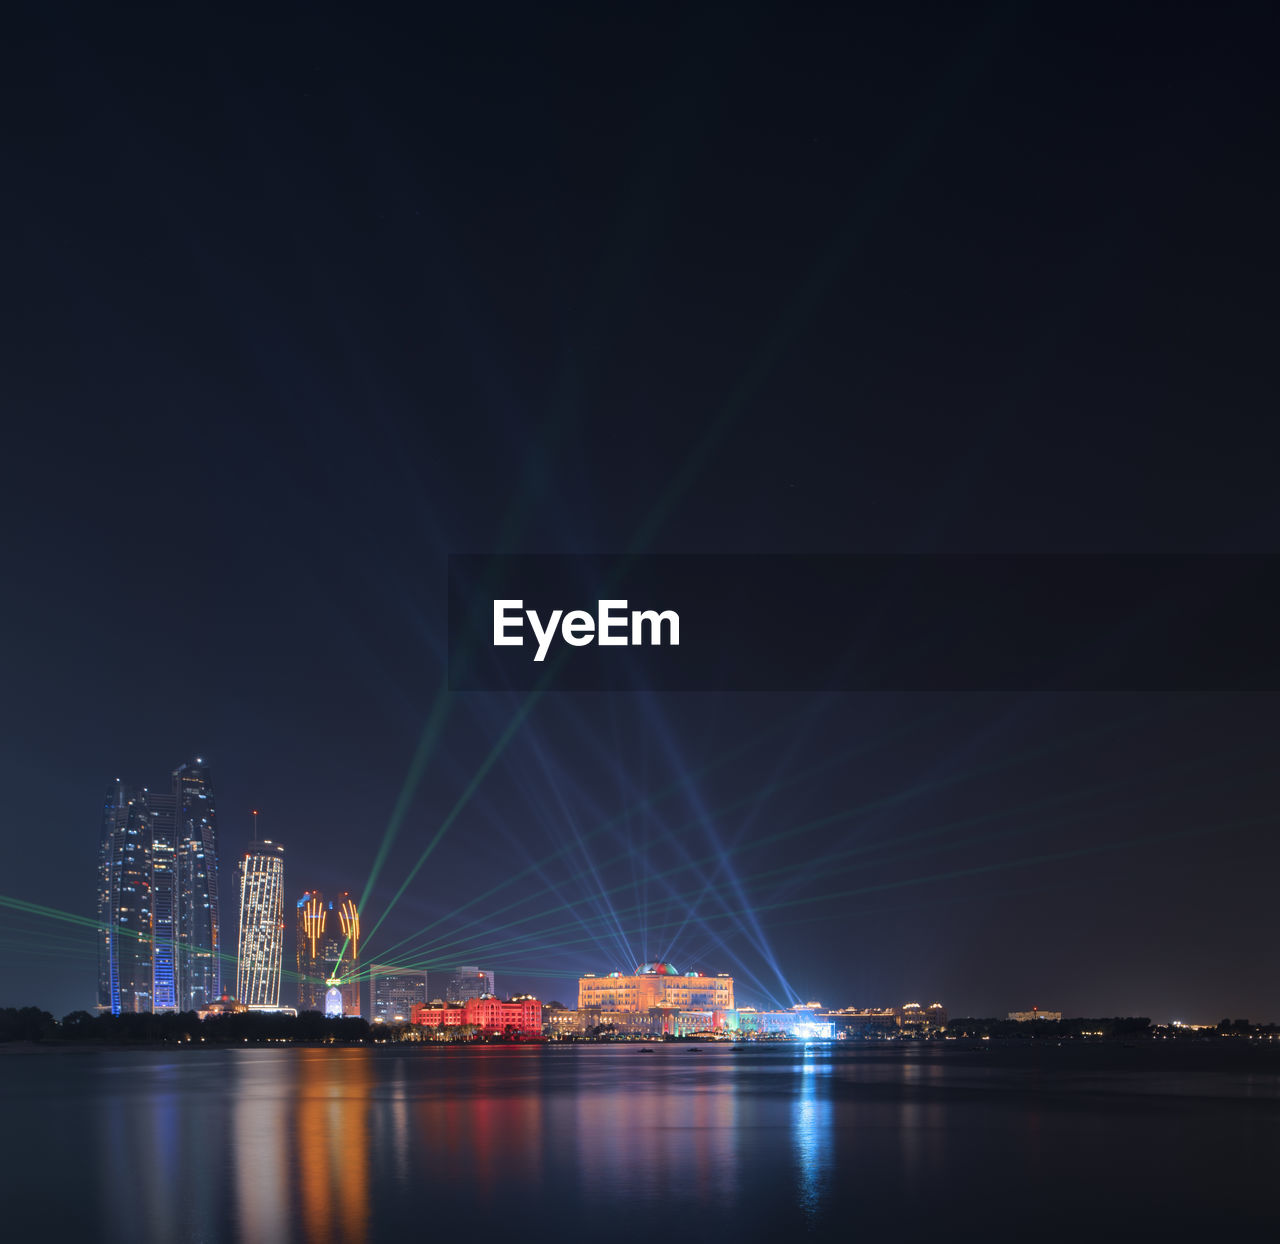 Laser beams over emirates palace in abu dhabi during uae 50th national day celebrations .